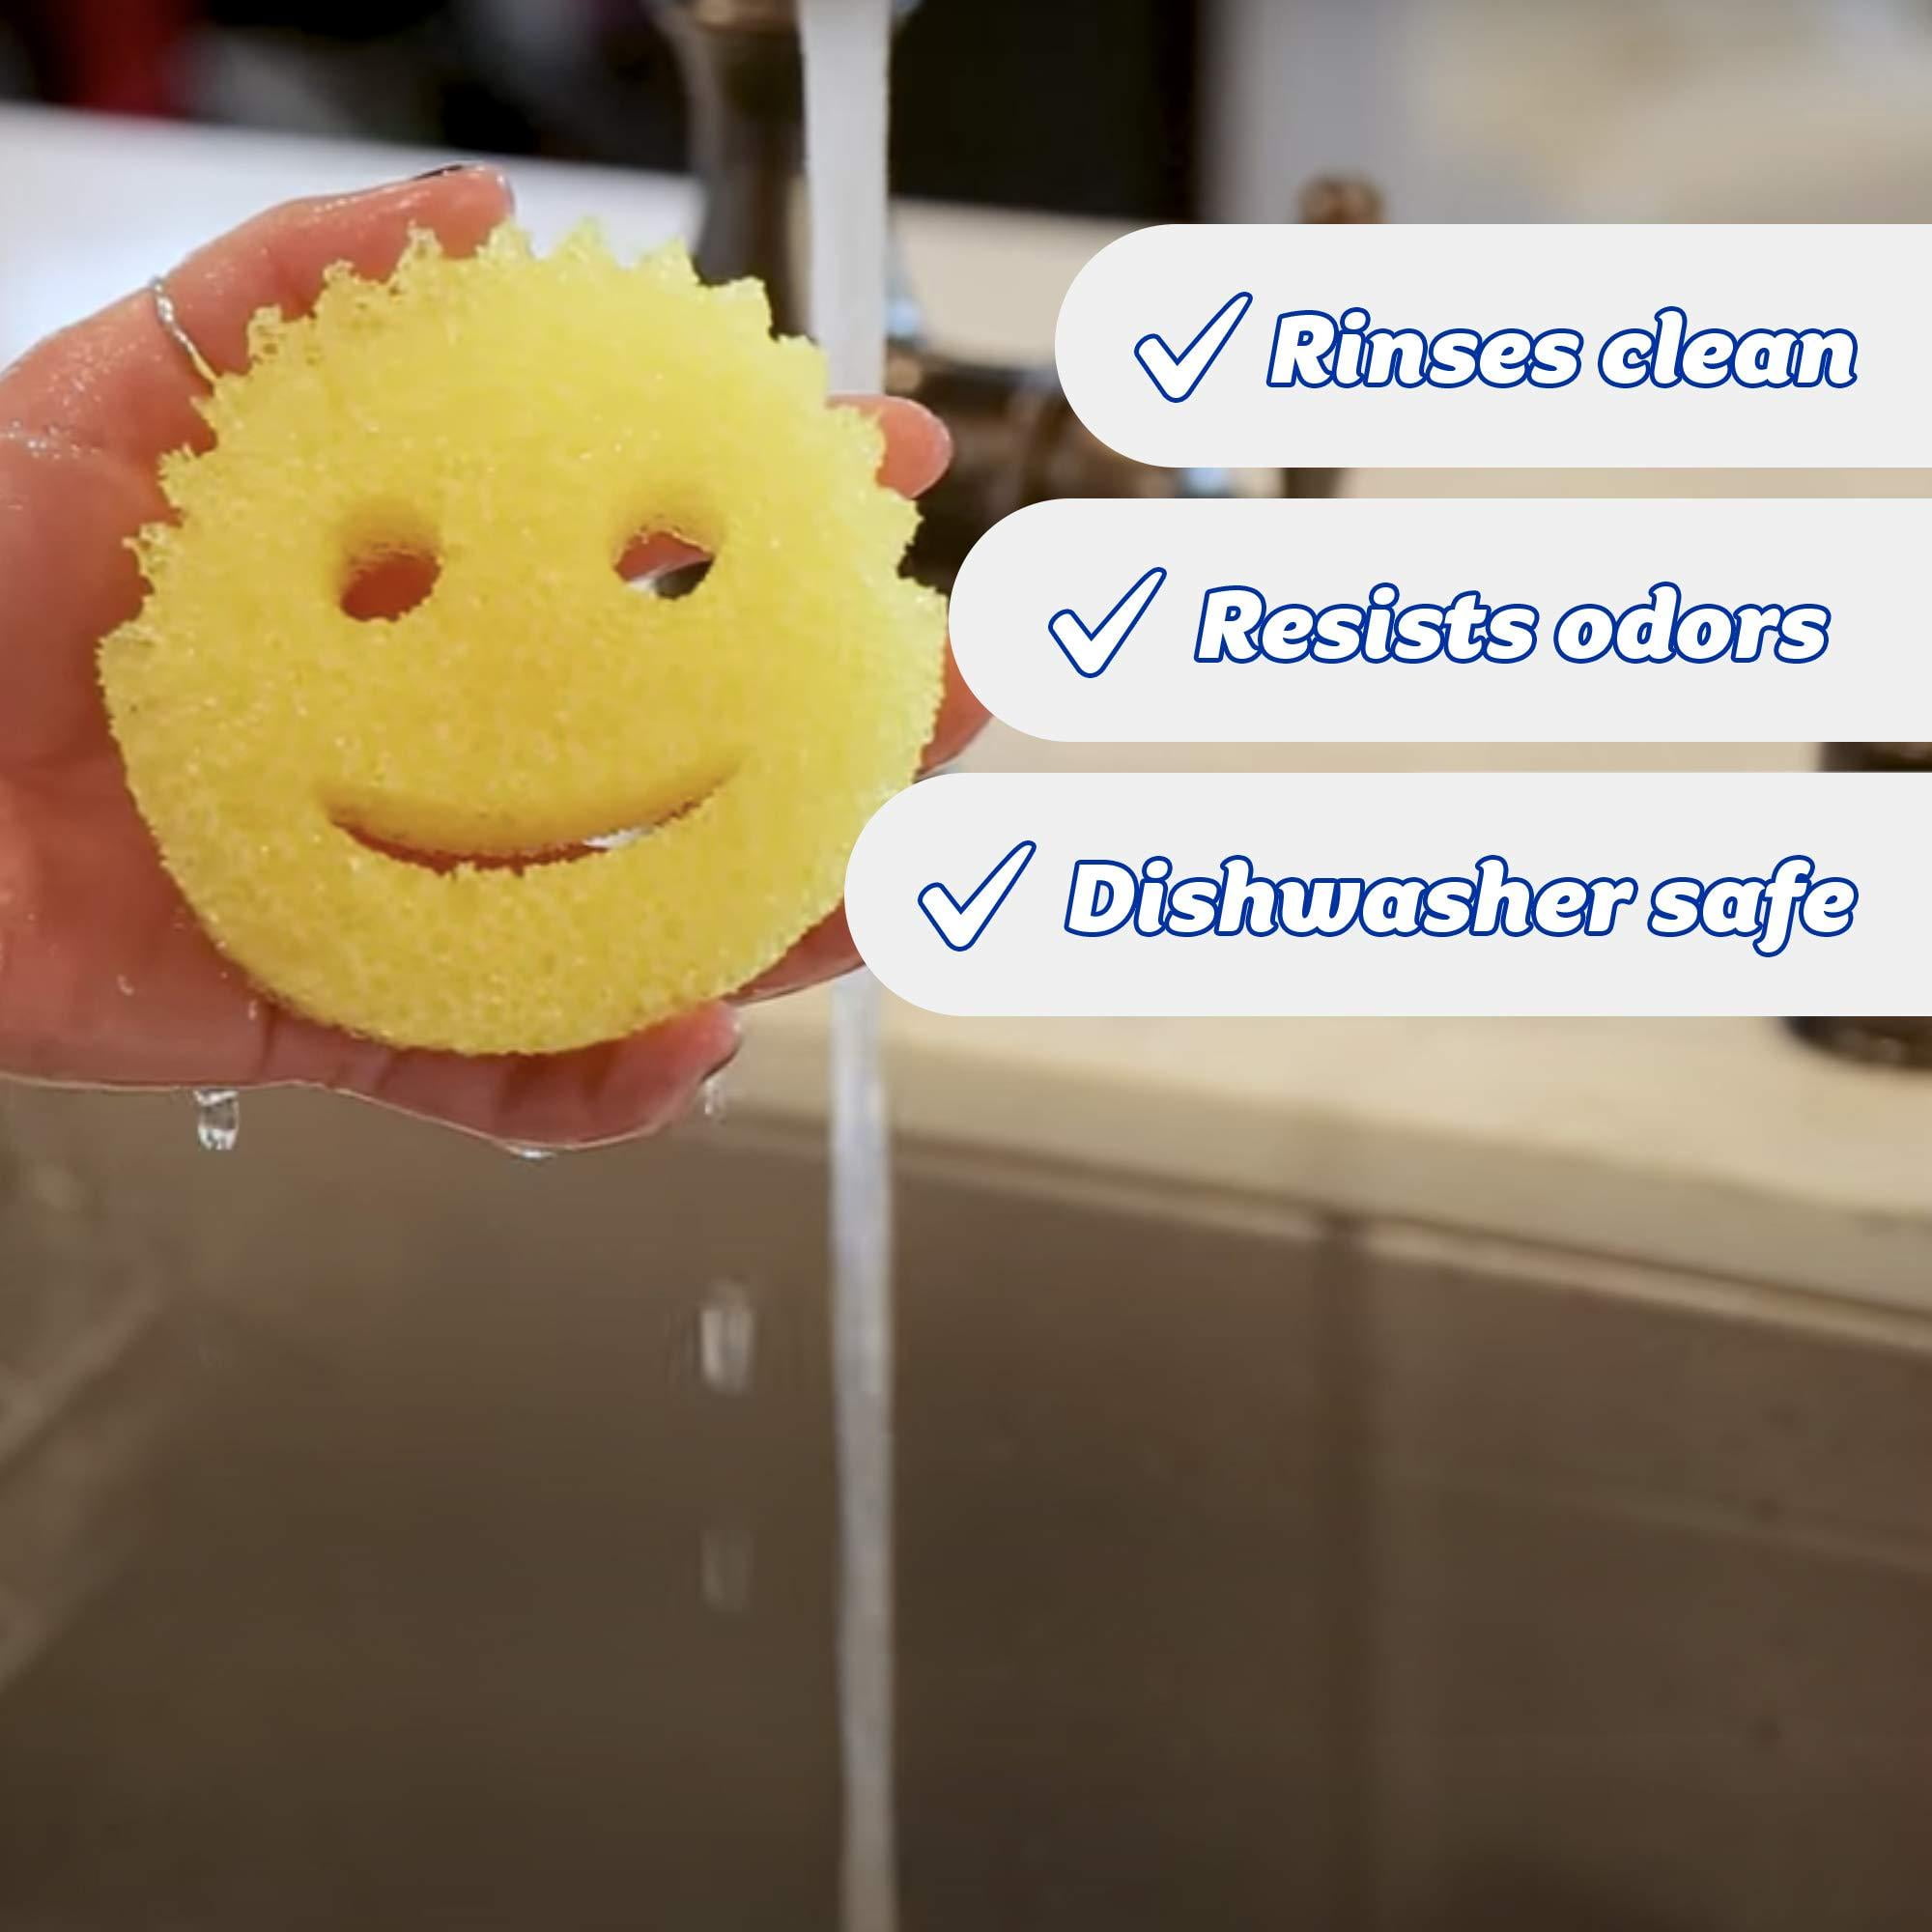 Dishwasher Safe Deep Cleaning Lemon Fresh Scrubber FlexTexture Sponge Odor Resistant Ergonomic 4pk Firm in Cold Scrub Daddy® Soft in Warm Water Scratch Free Functional Multiuse 